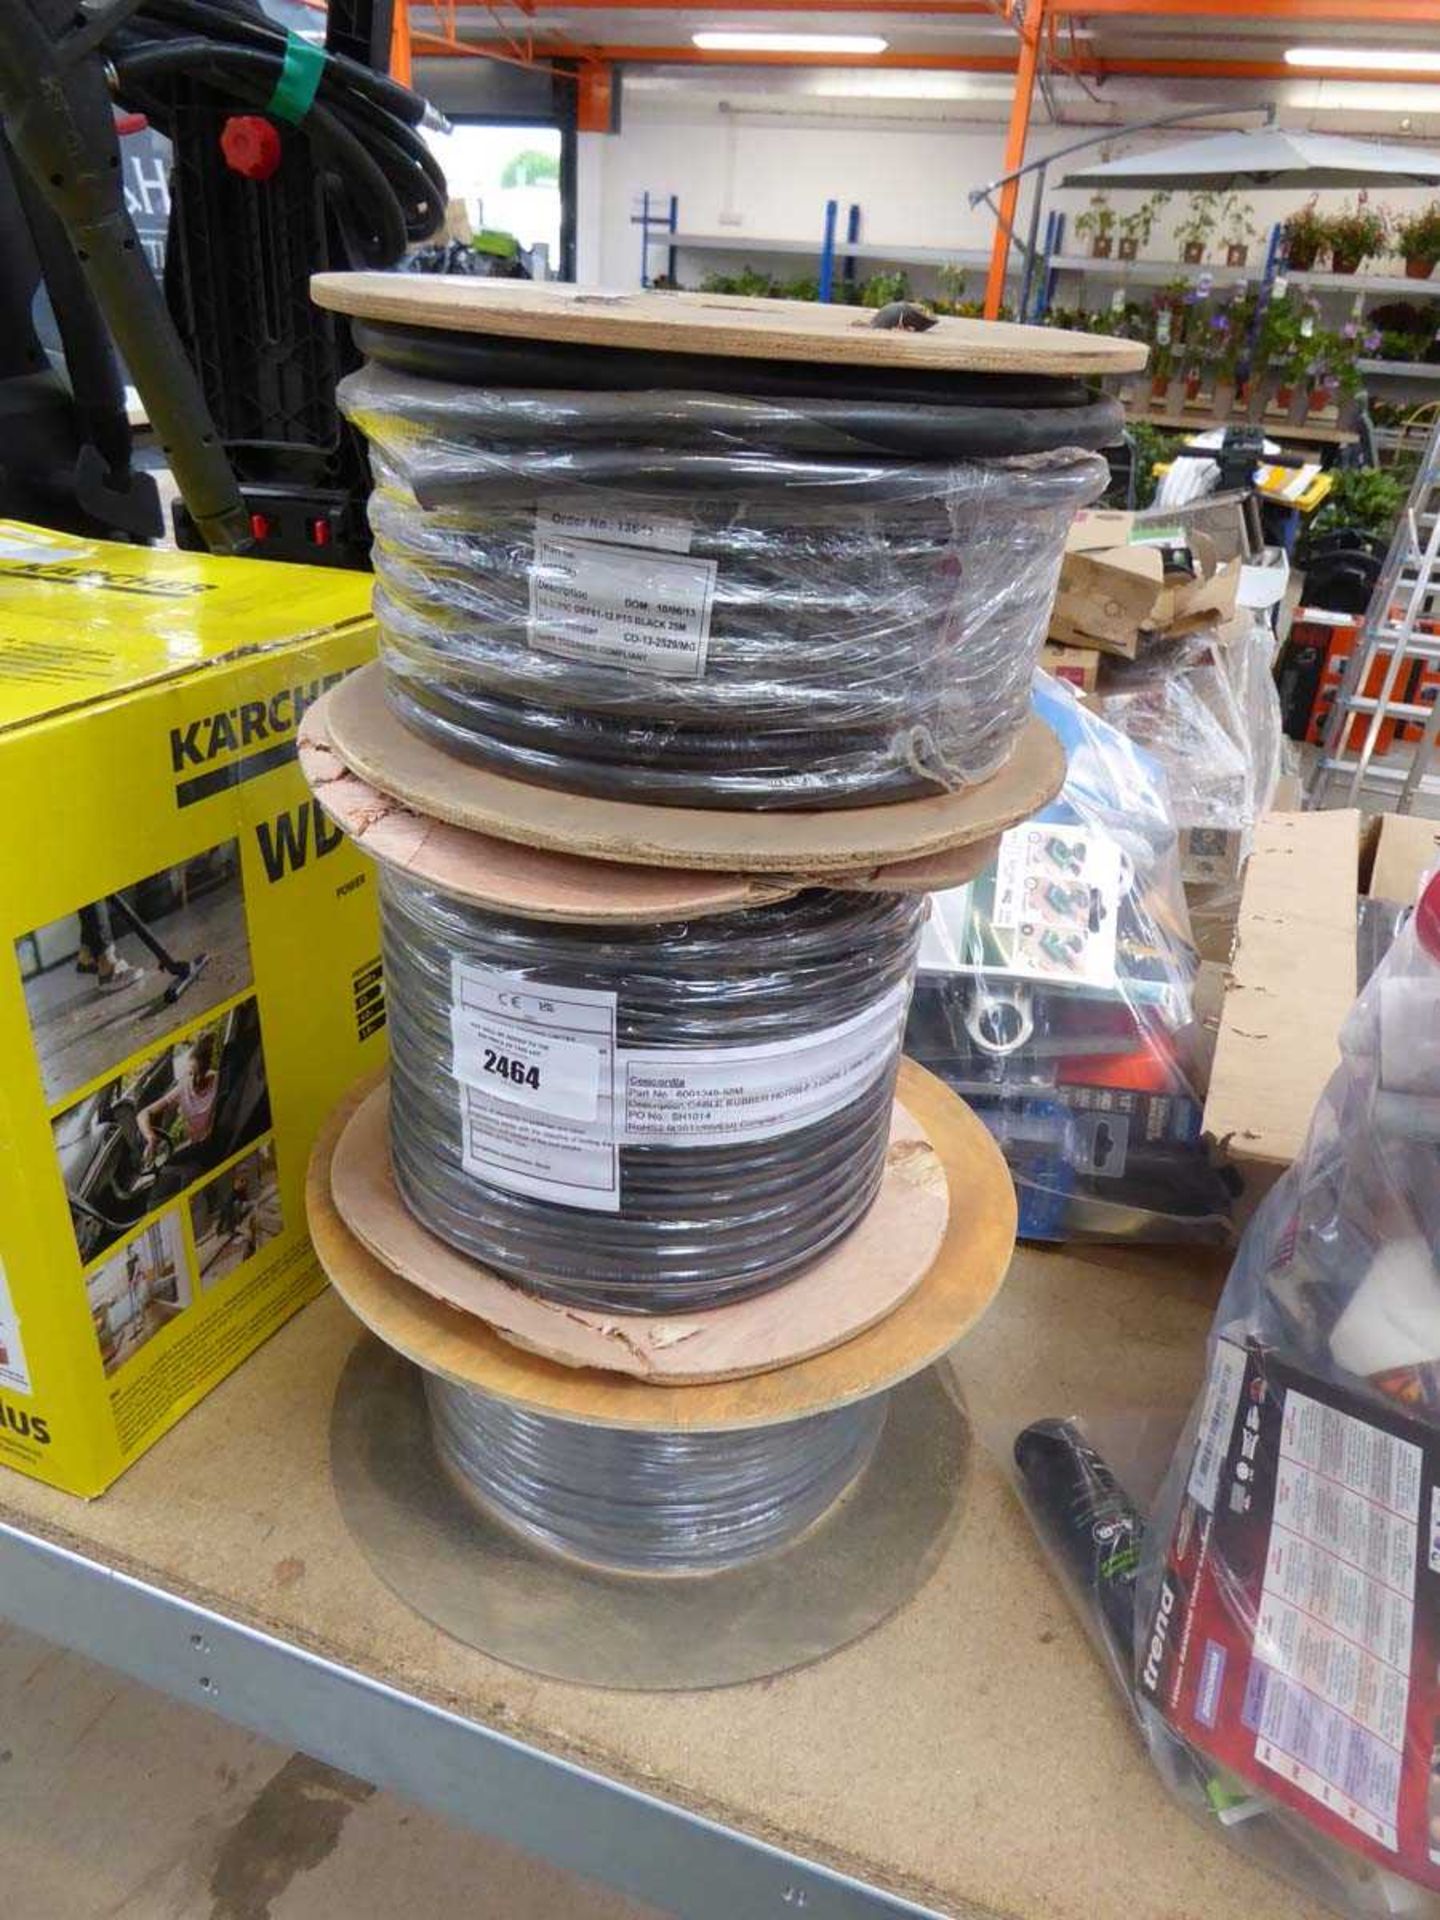 +VAT 3 reels of mixed size cabling